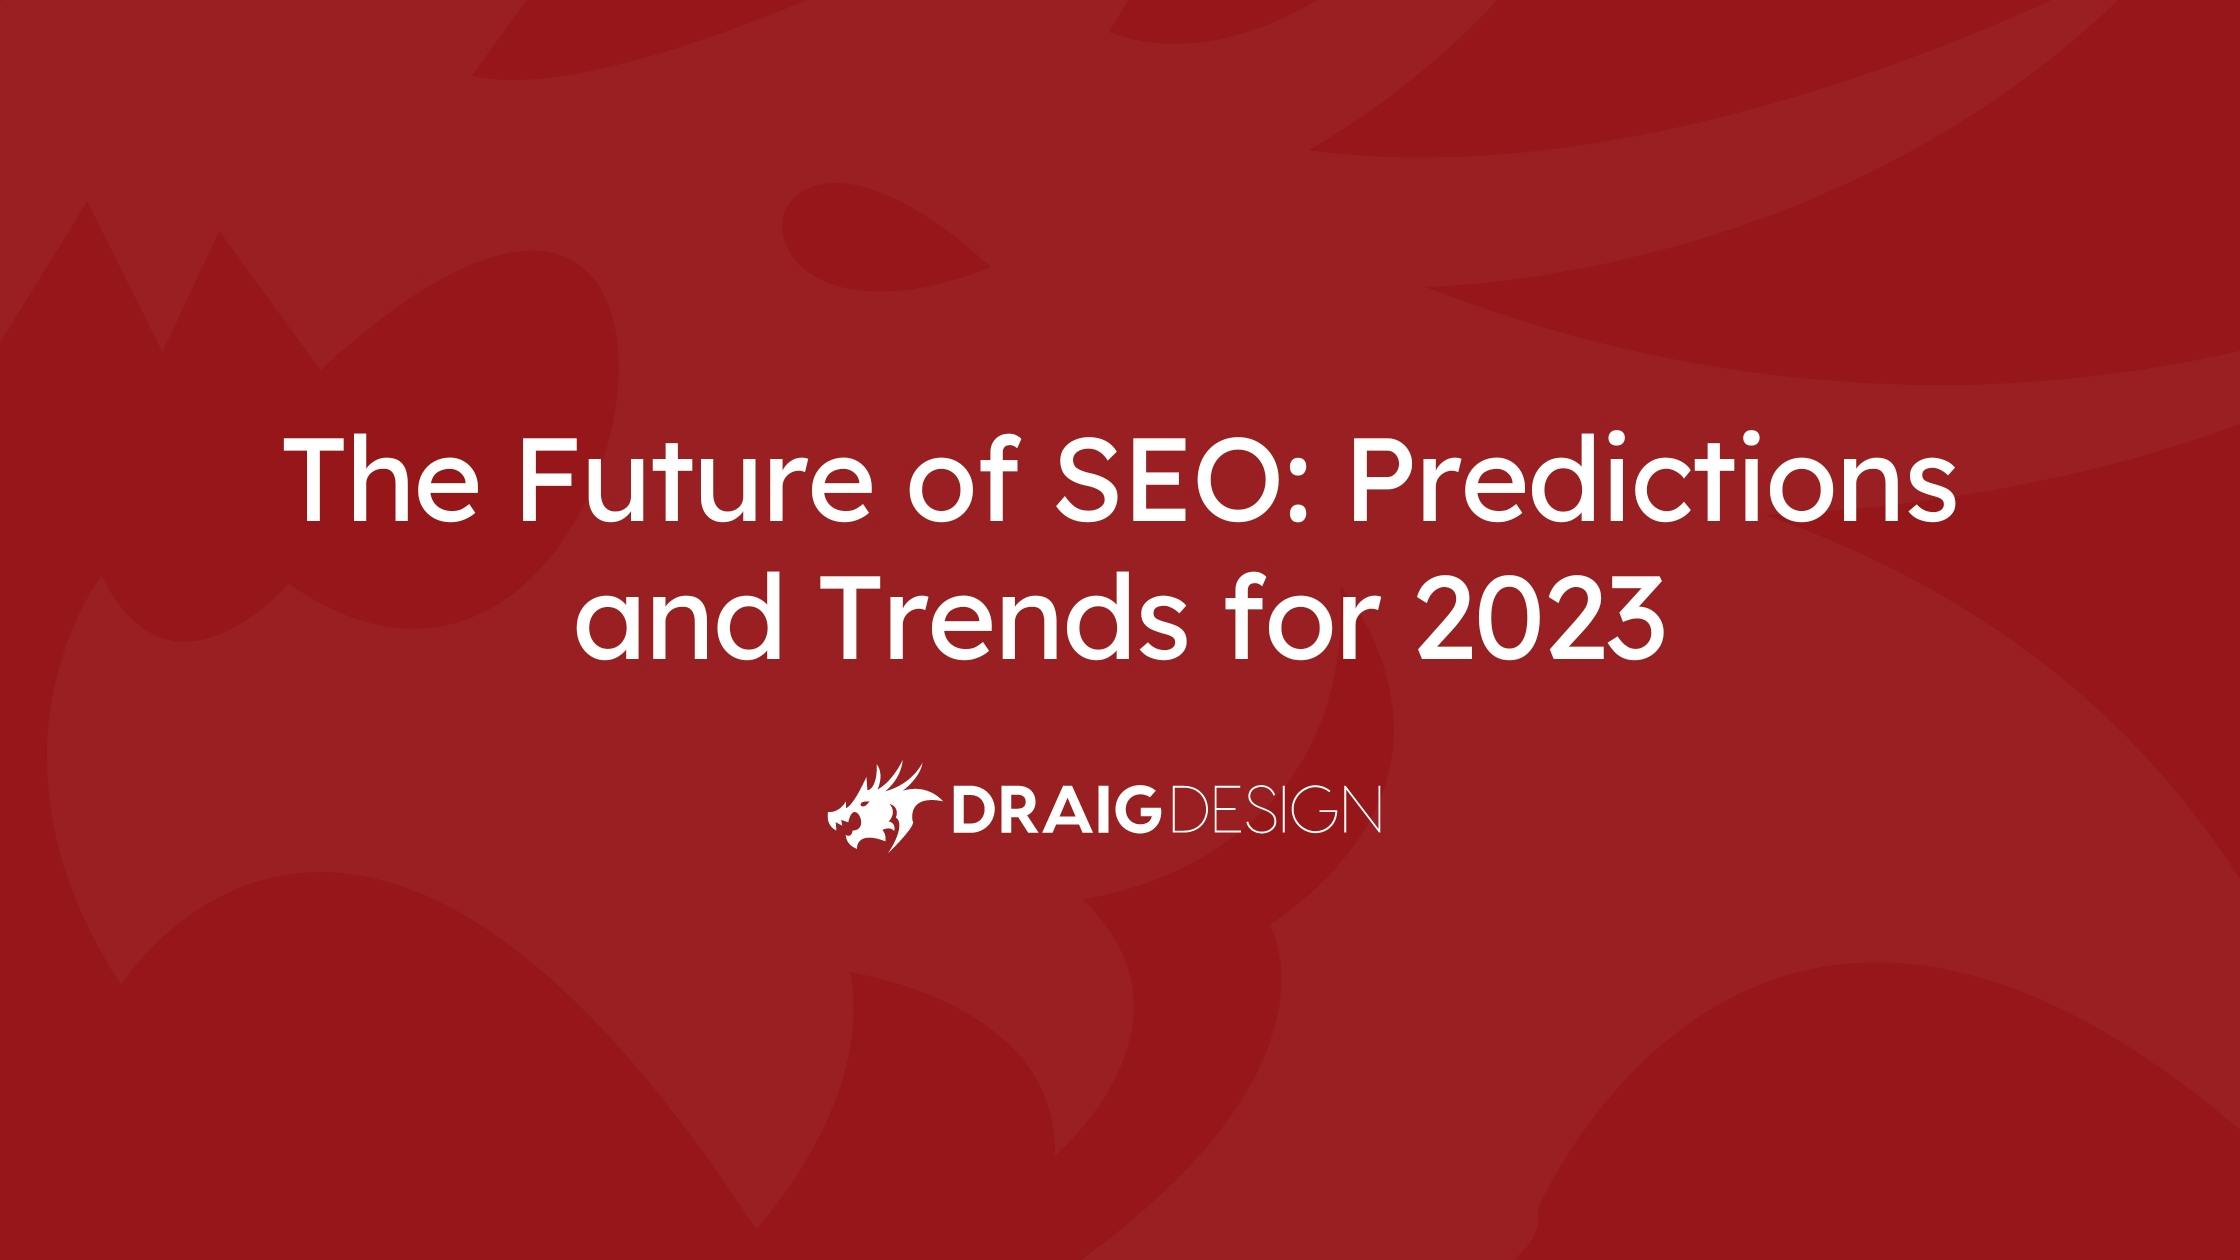 The Future of SEO: Predictions and Trends for 2023